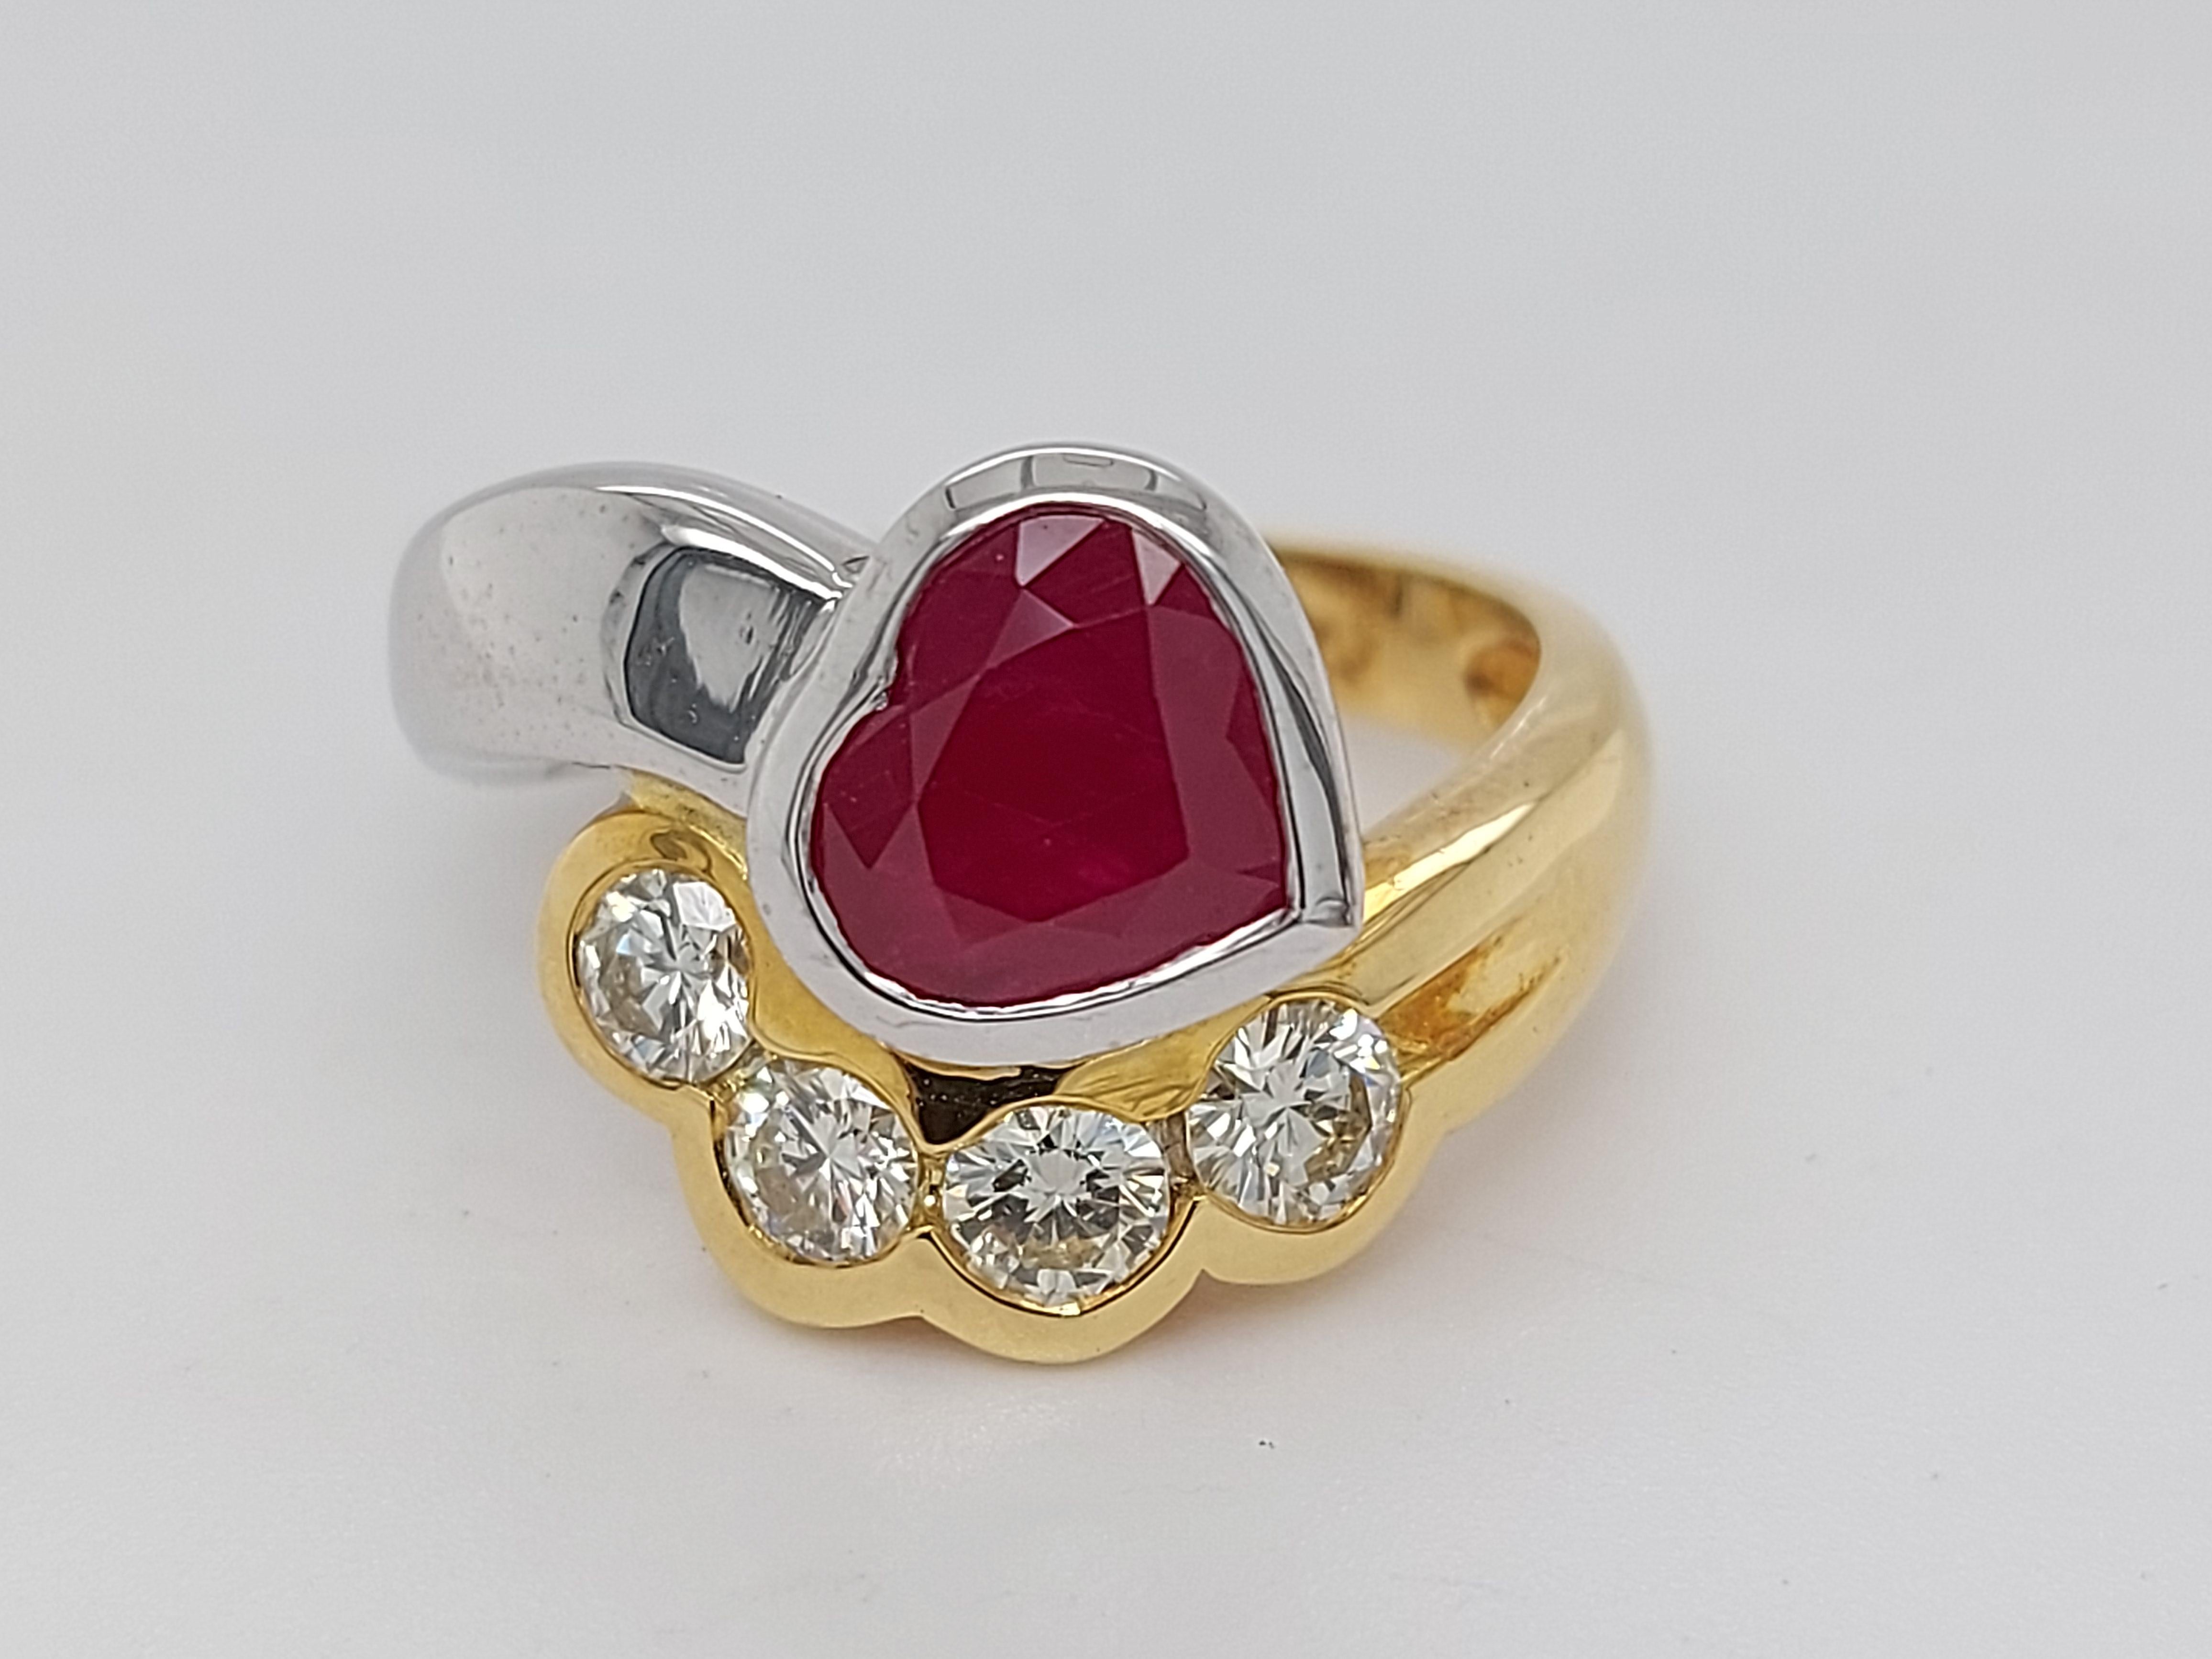 Artisan Beautiful 18kt Yellow and White Gold Ring with 4 Diamonds and Heart Shaped Ruby For Sale